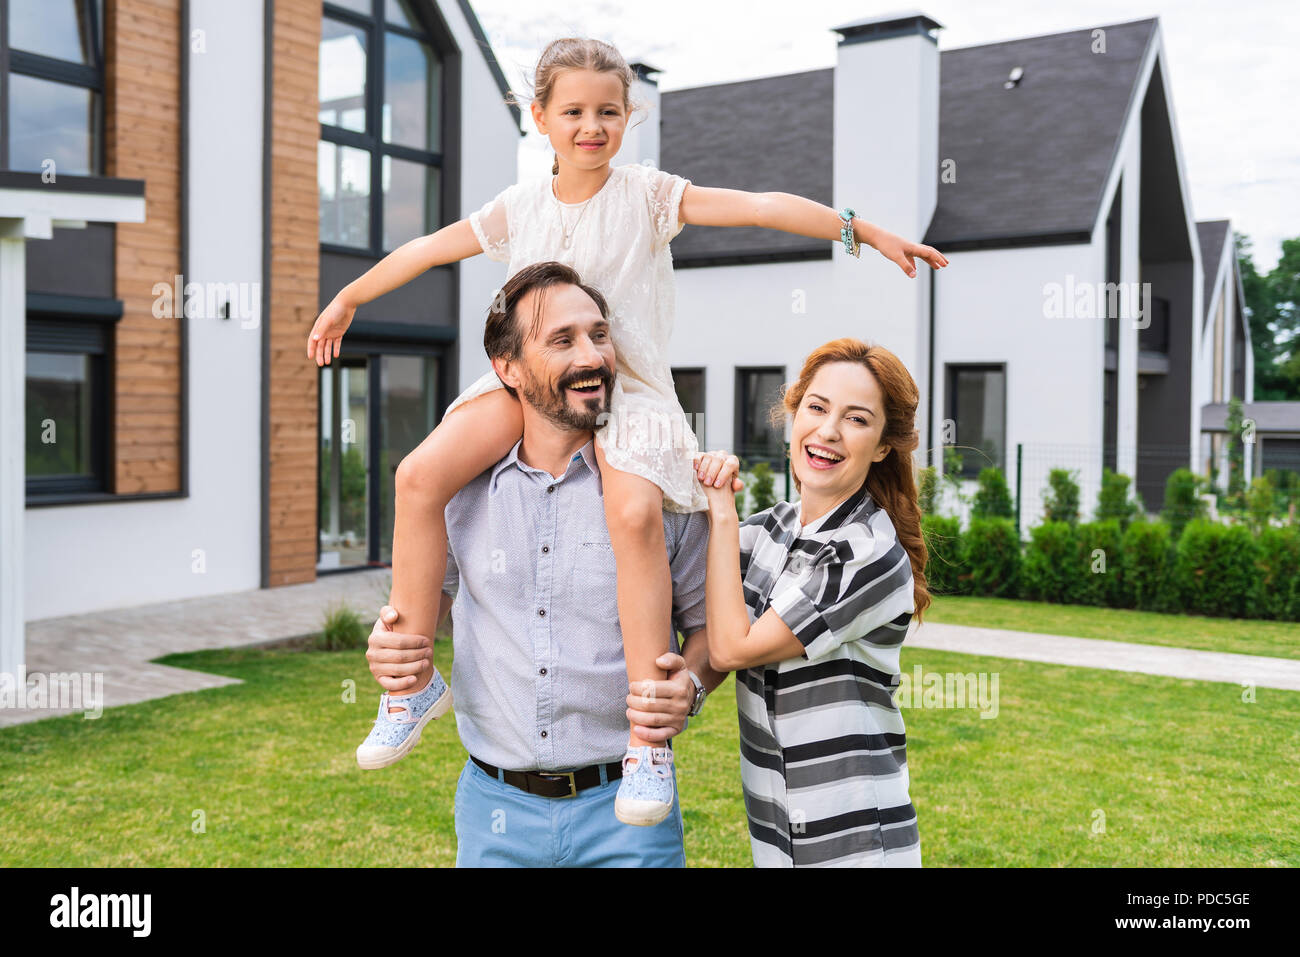 Nice cute girl sitting on her fathers shoulders Stock Photo